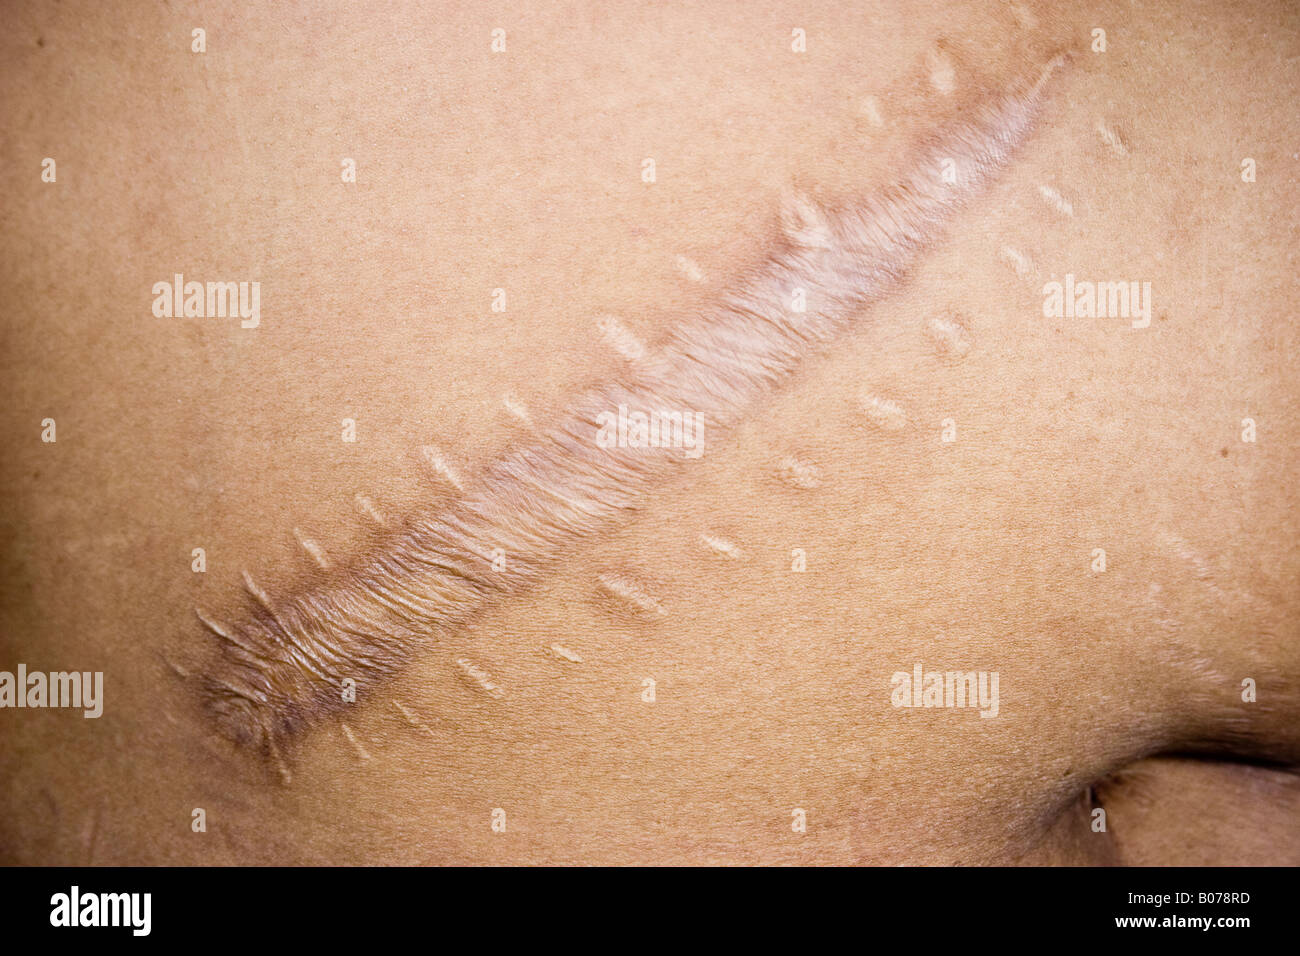 Knife wound surgery scar Stock Photo